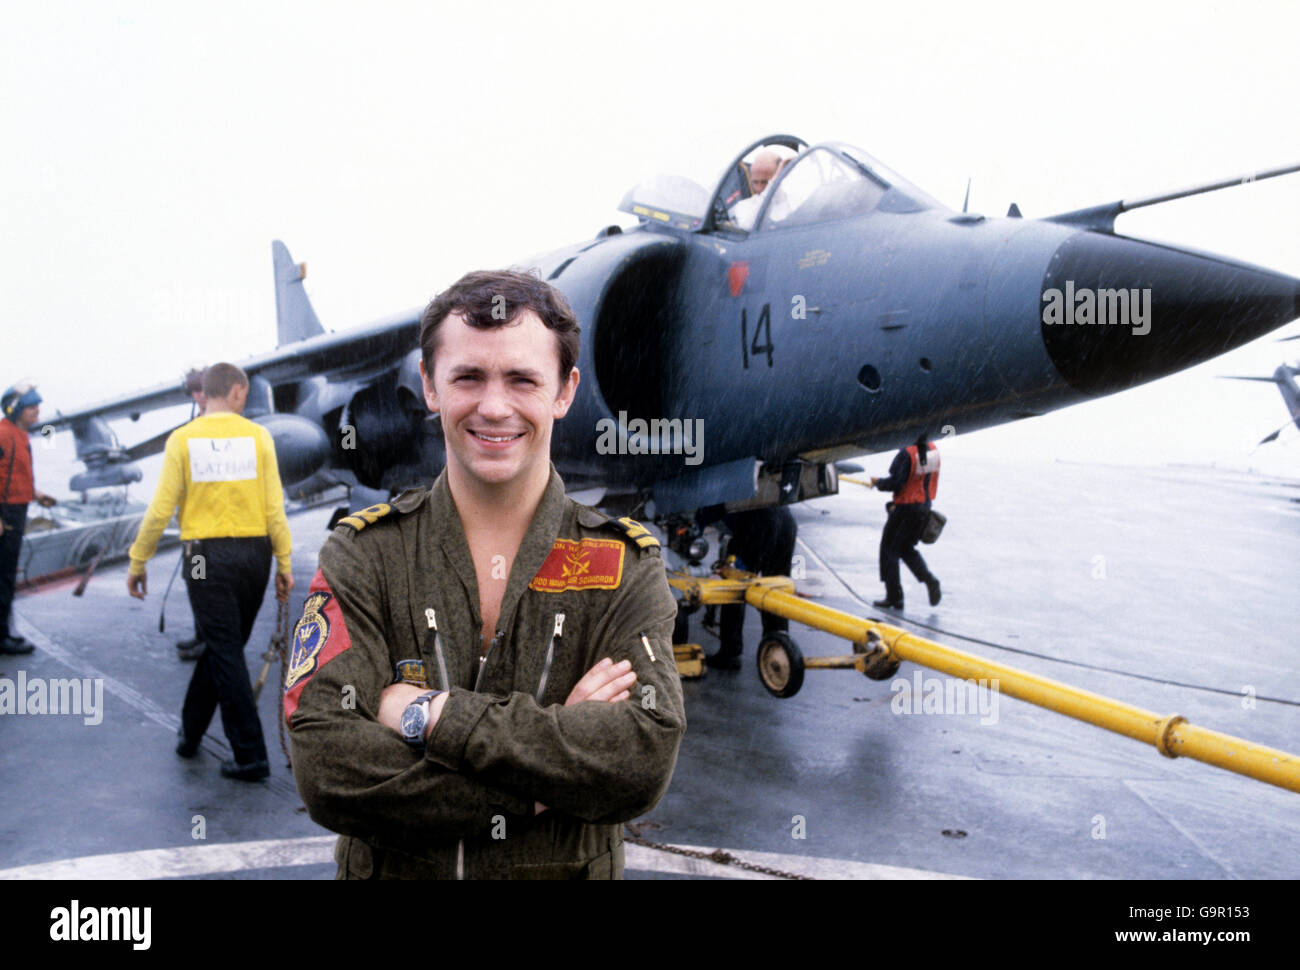 Lieutenant simon Hargreaves, 25, from Bower Hinton, Somerset, standing in front of his Sea Harrier on flight deck of HMS Hermes after returning to the carrier after intercepting an Argentinian military 707 aircraft - the first sighting of the enemy. Stock Photo